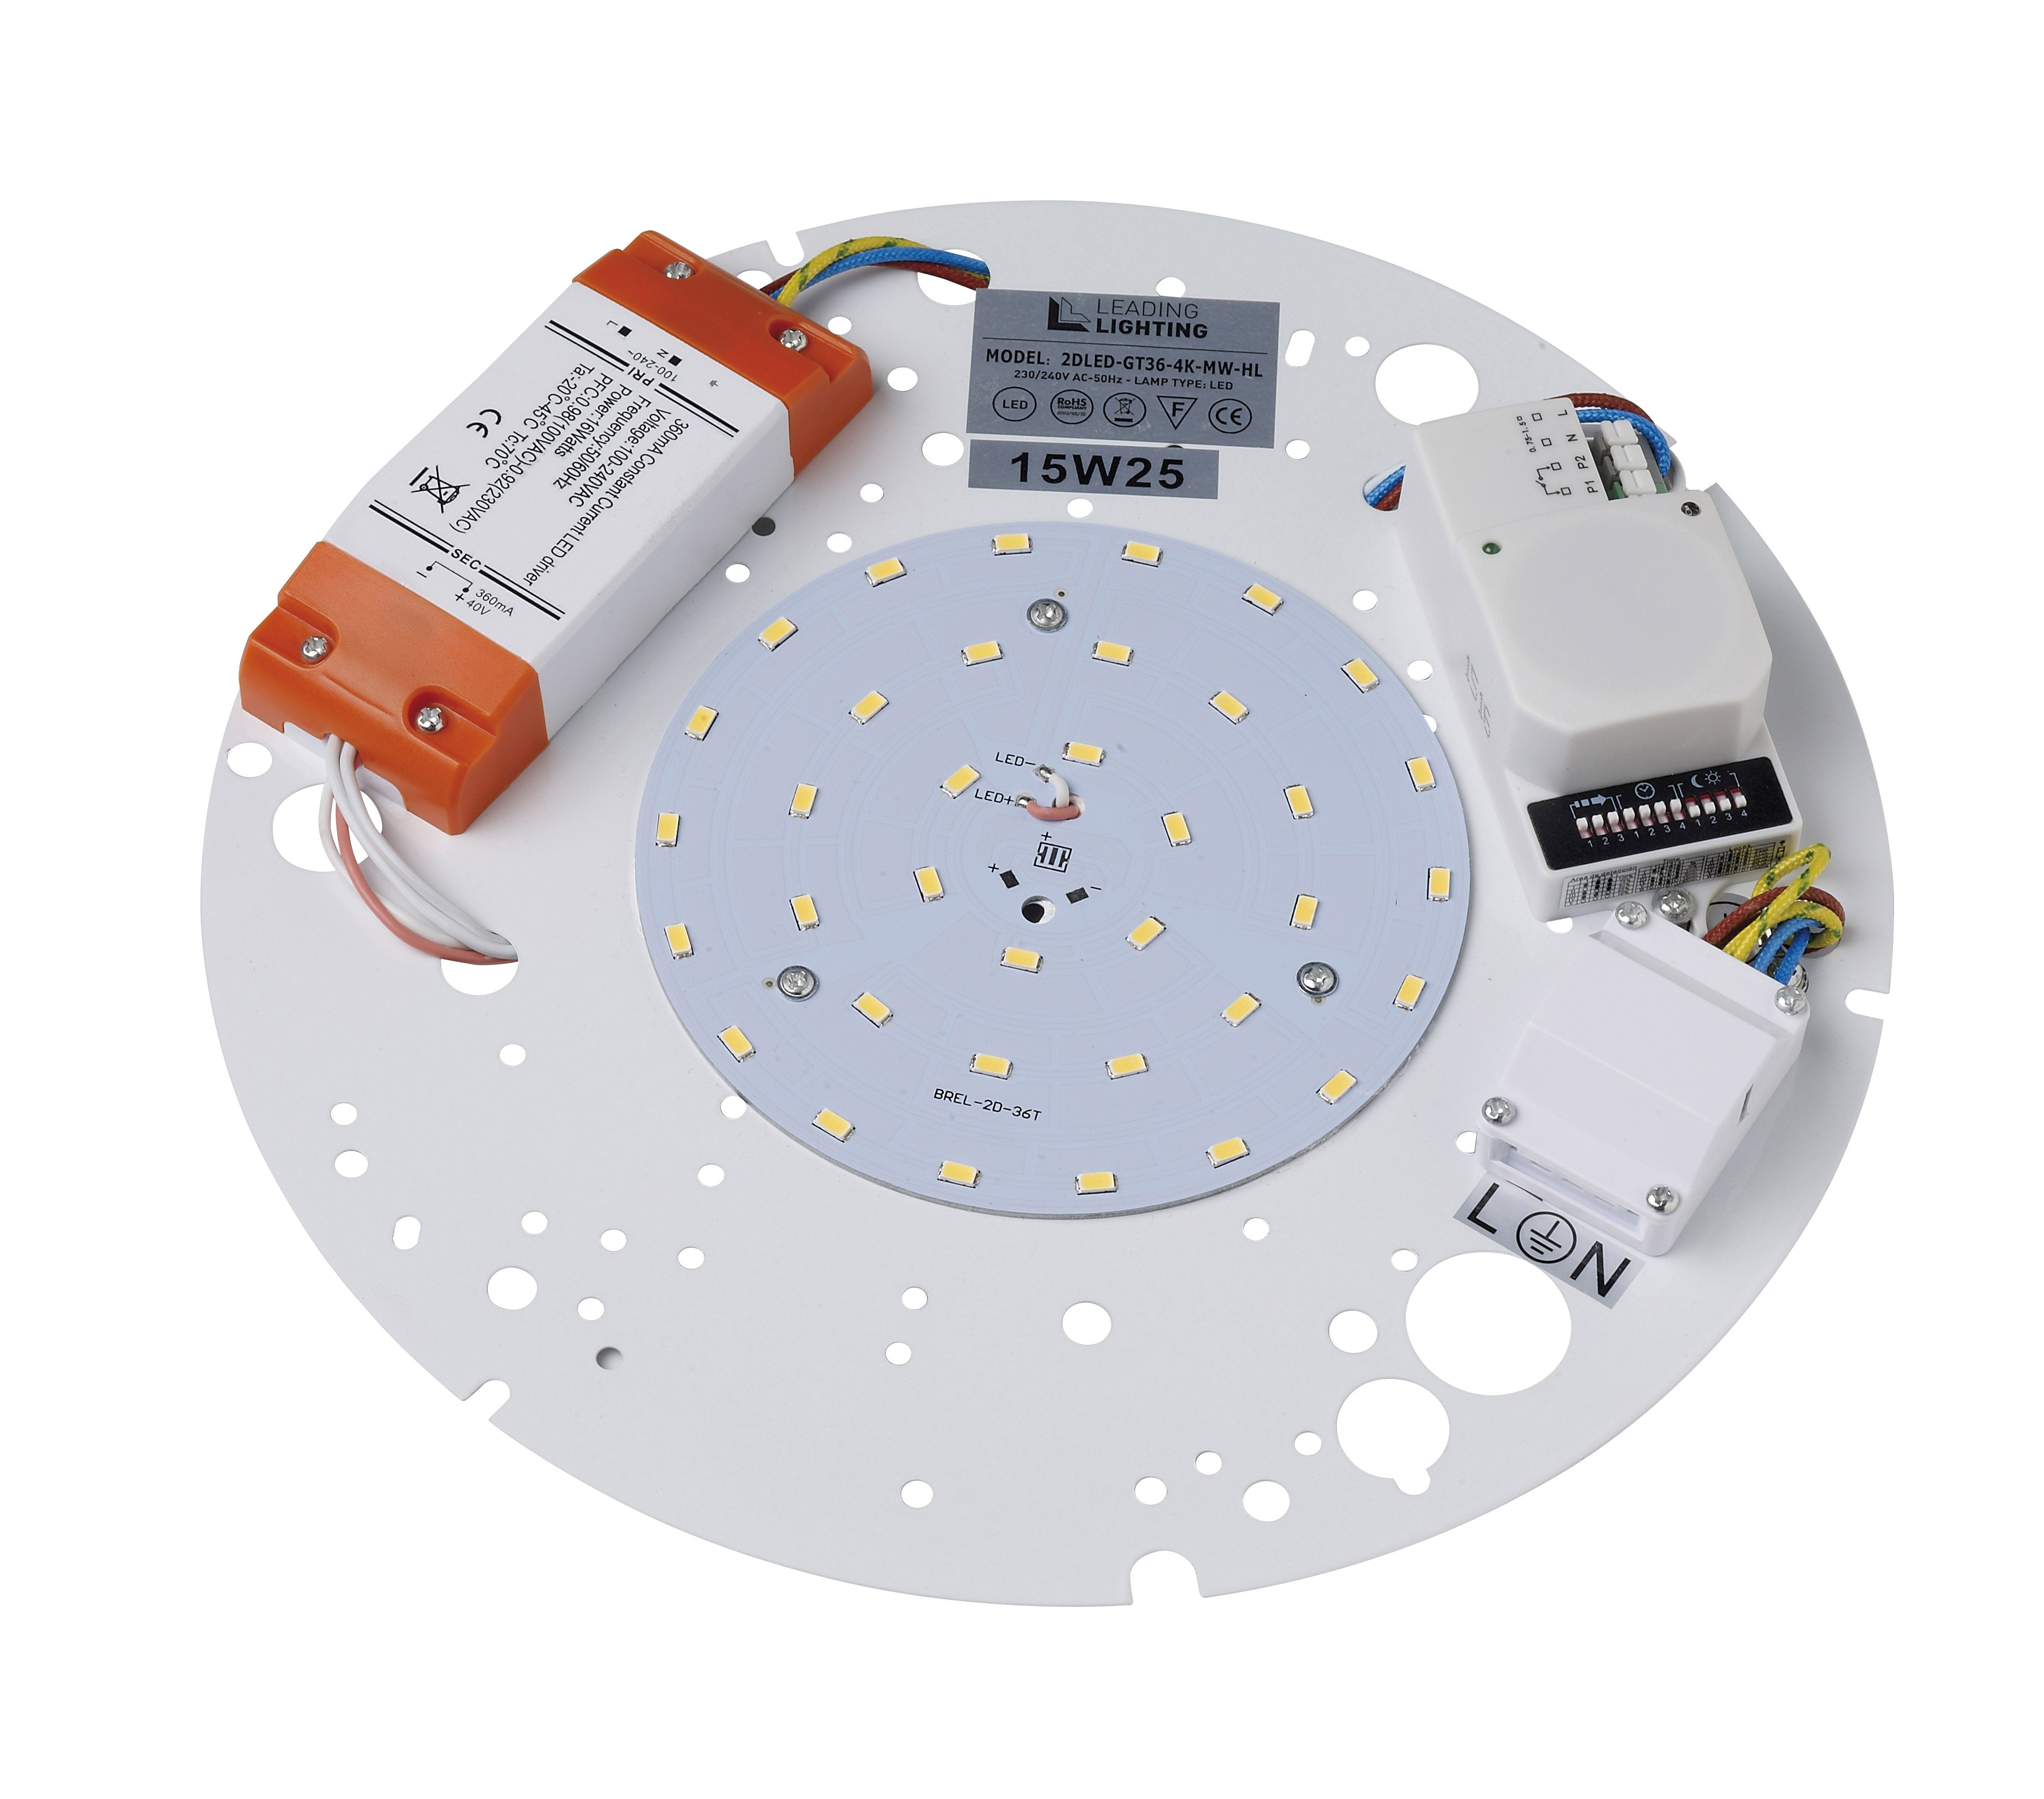 17W LED gear tray with high low microwave sensor